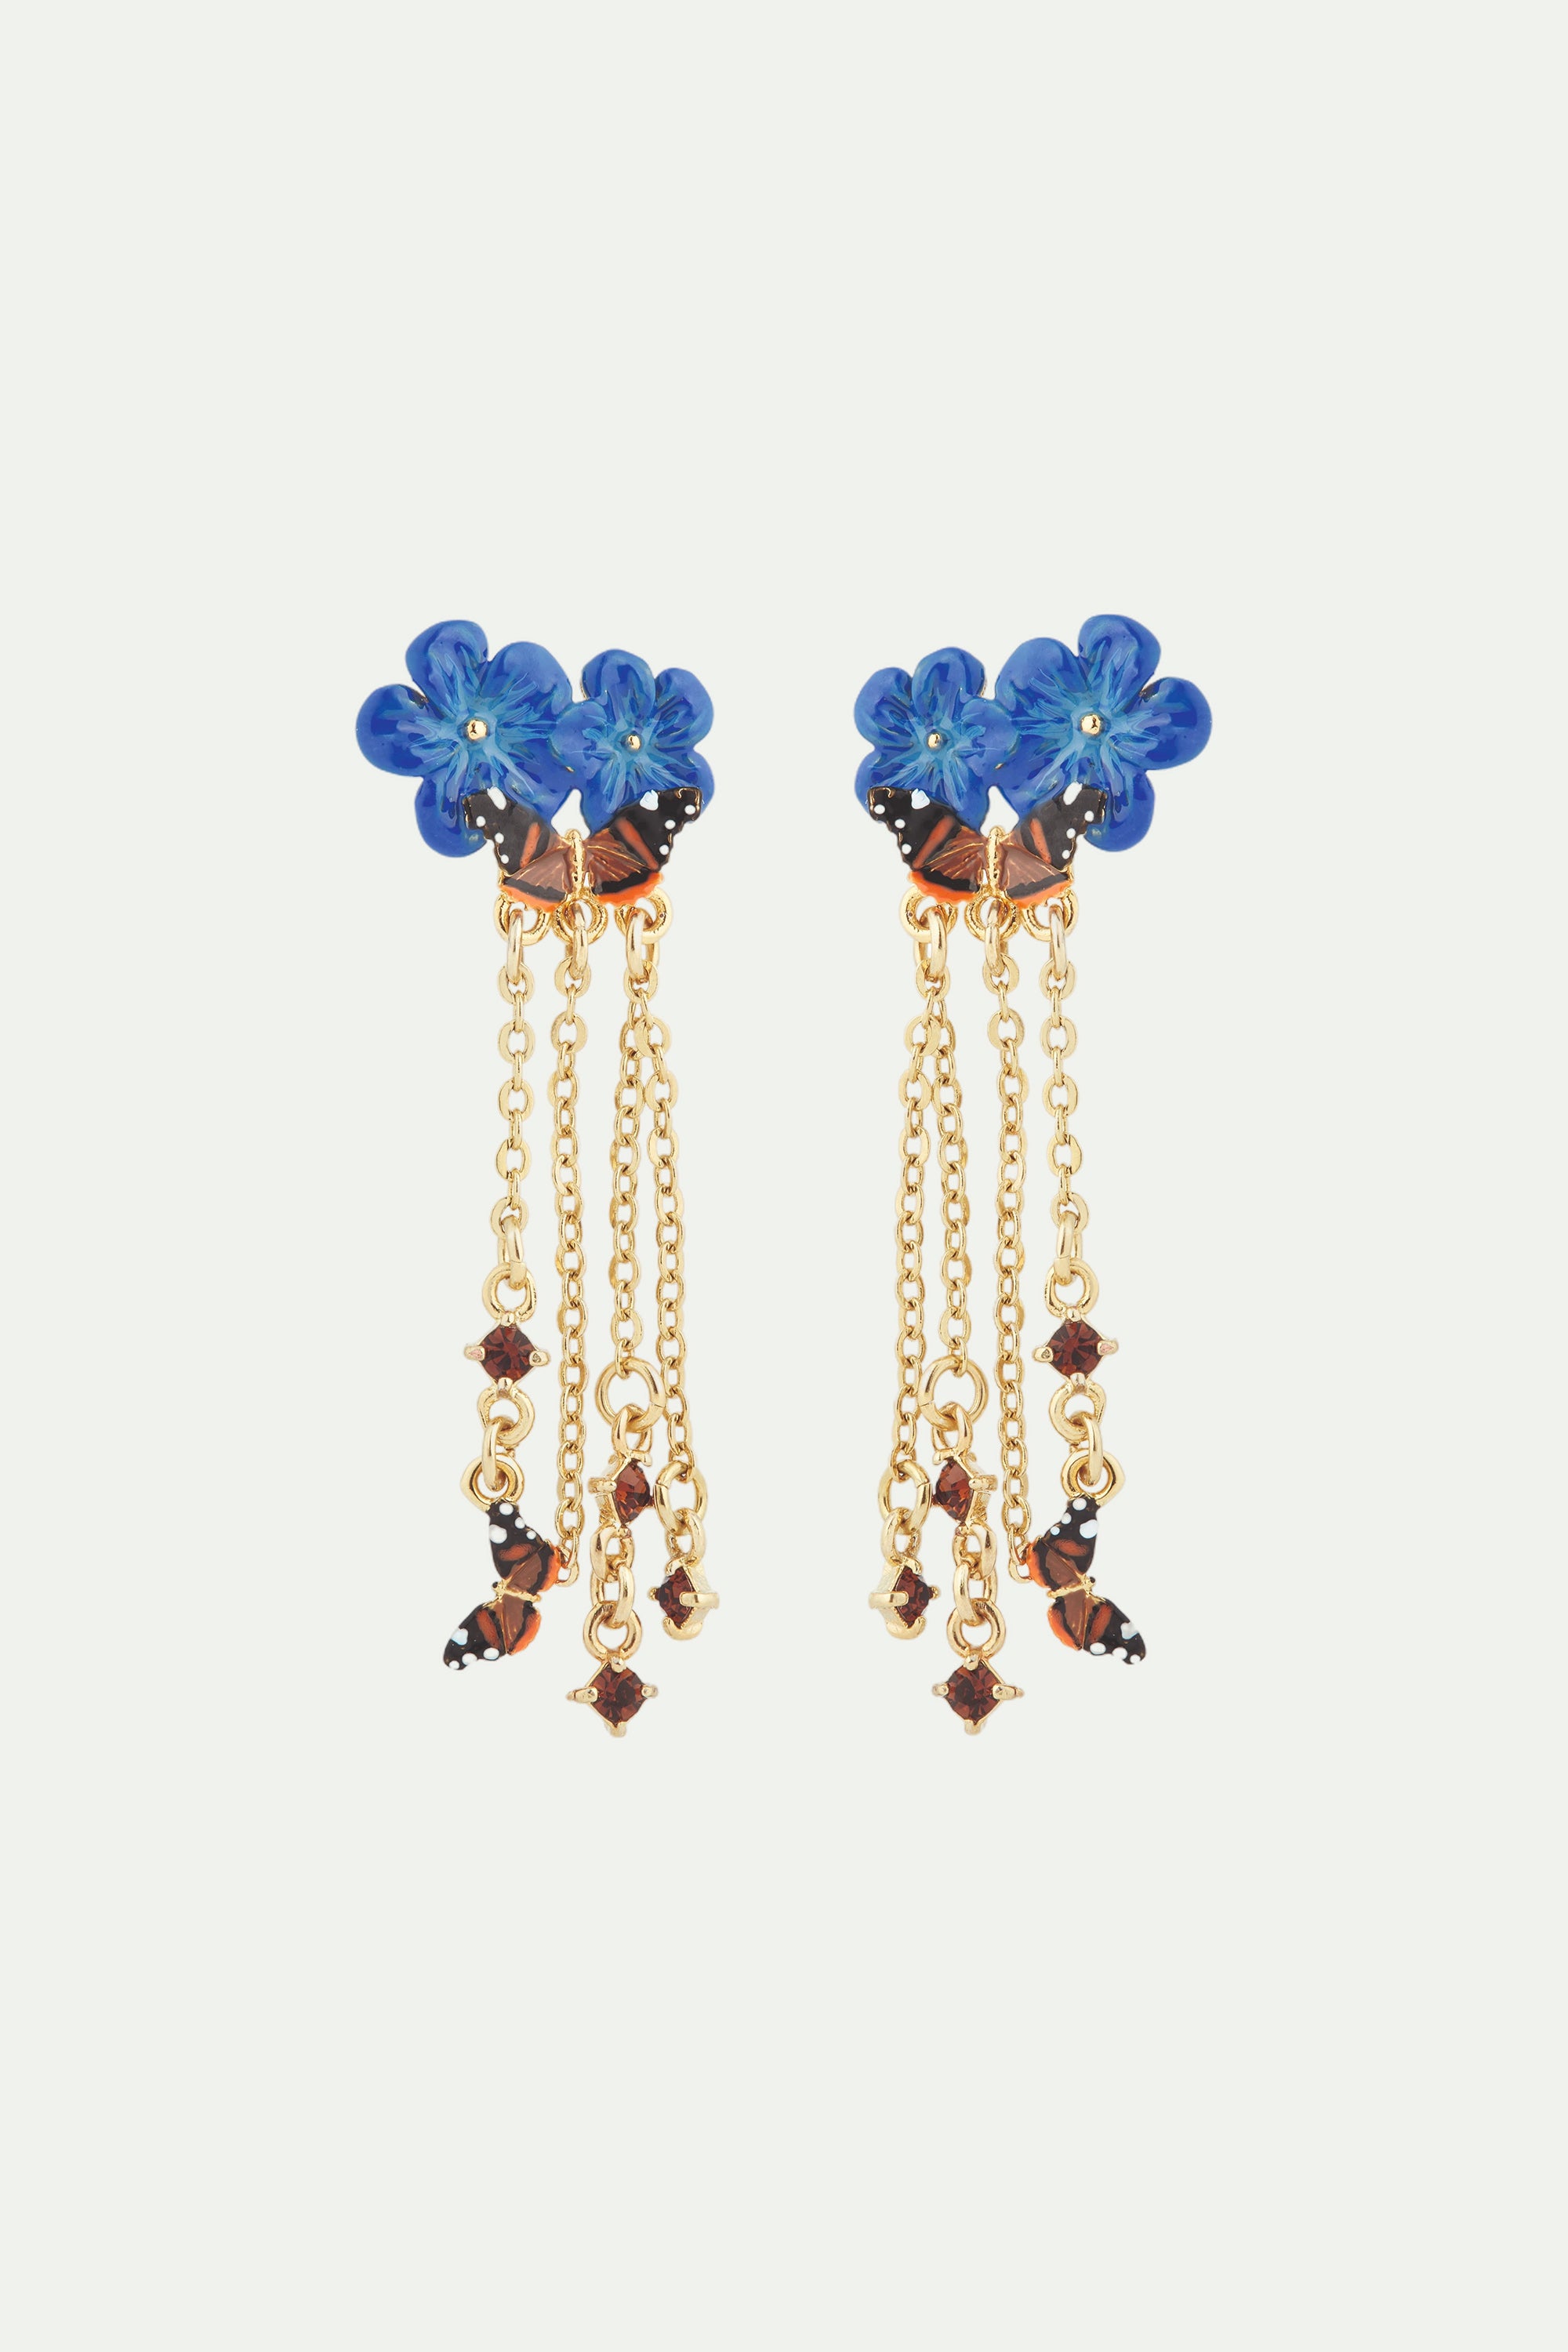 Blue flax flowers and butterfly dangling earrings